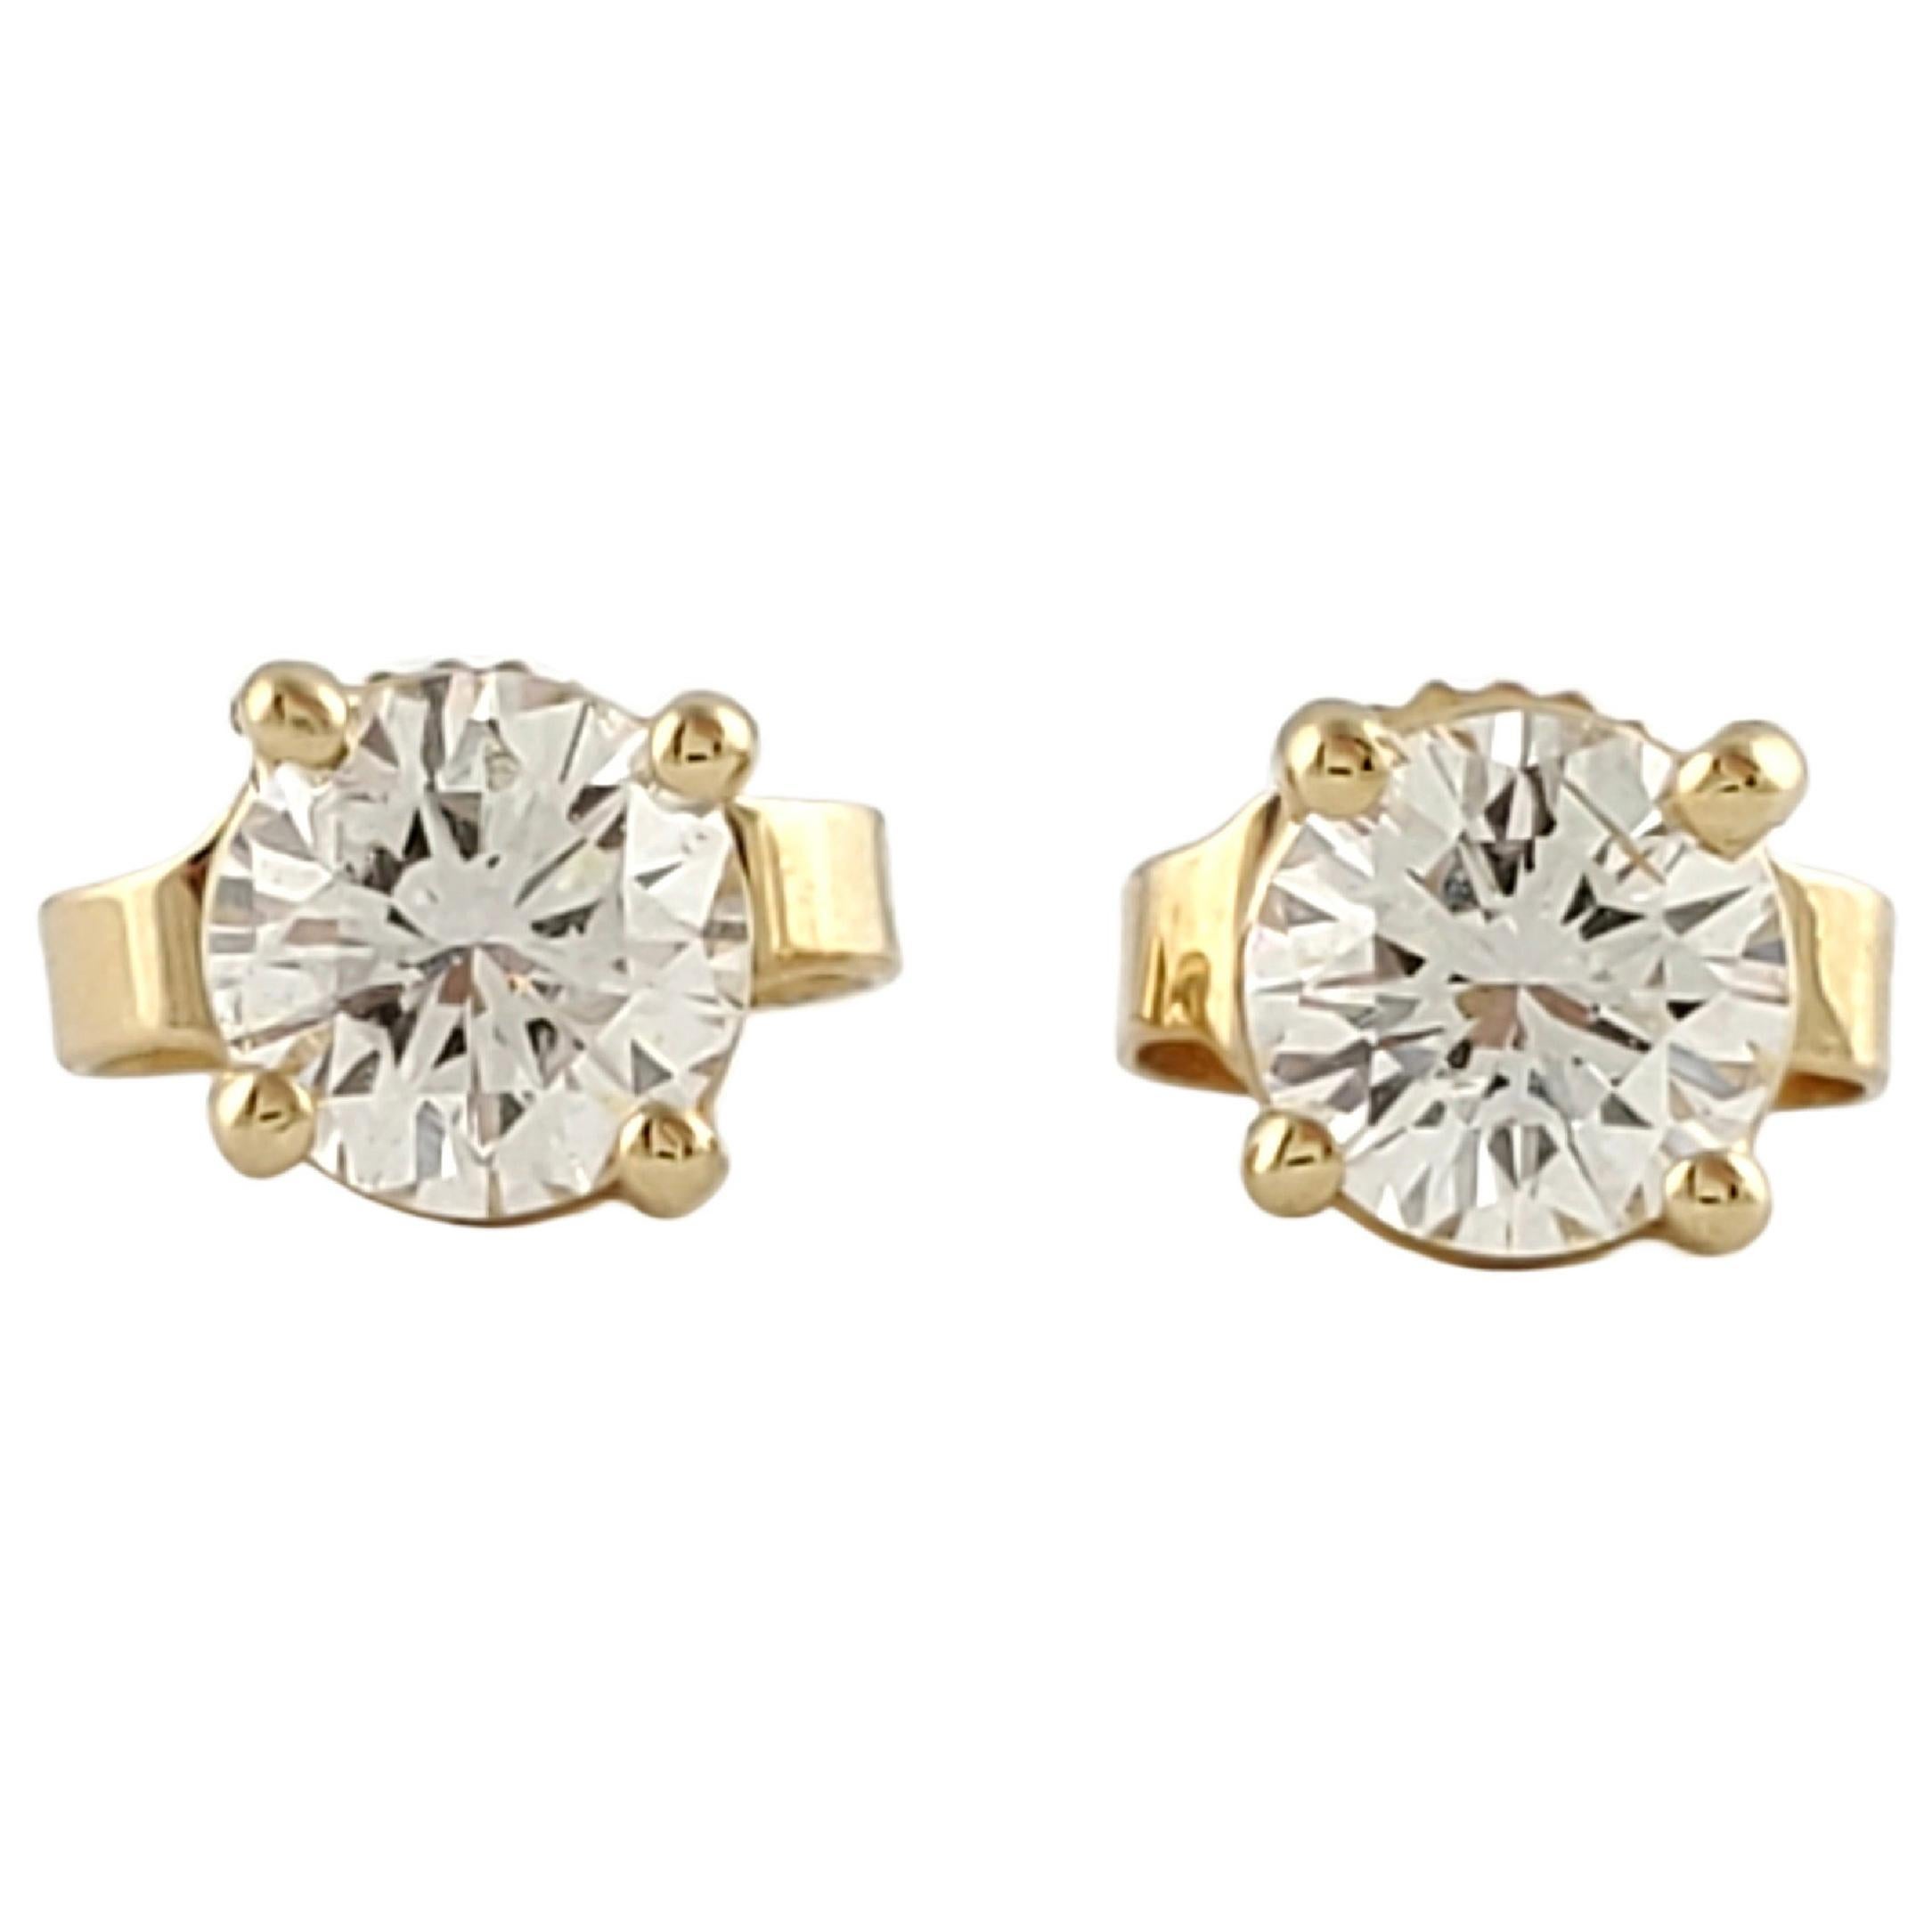 1/4 Carat Solitaire Diamond Stud Earrings 18K Yellow Gold Round